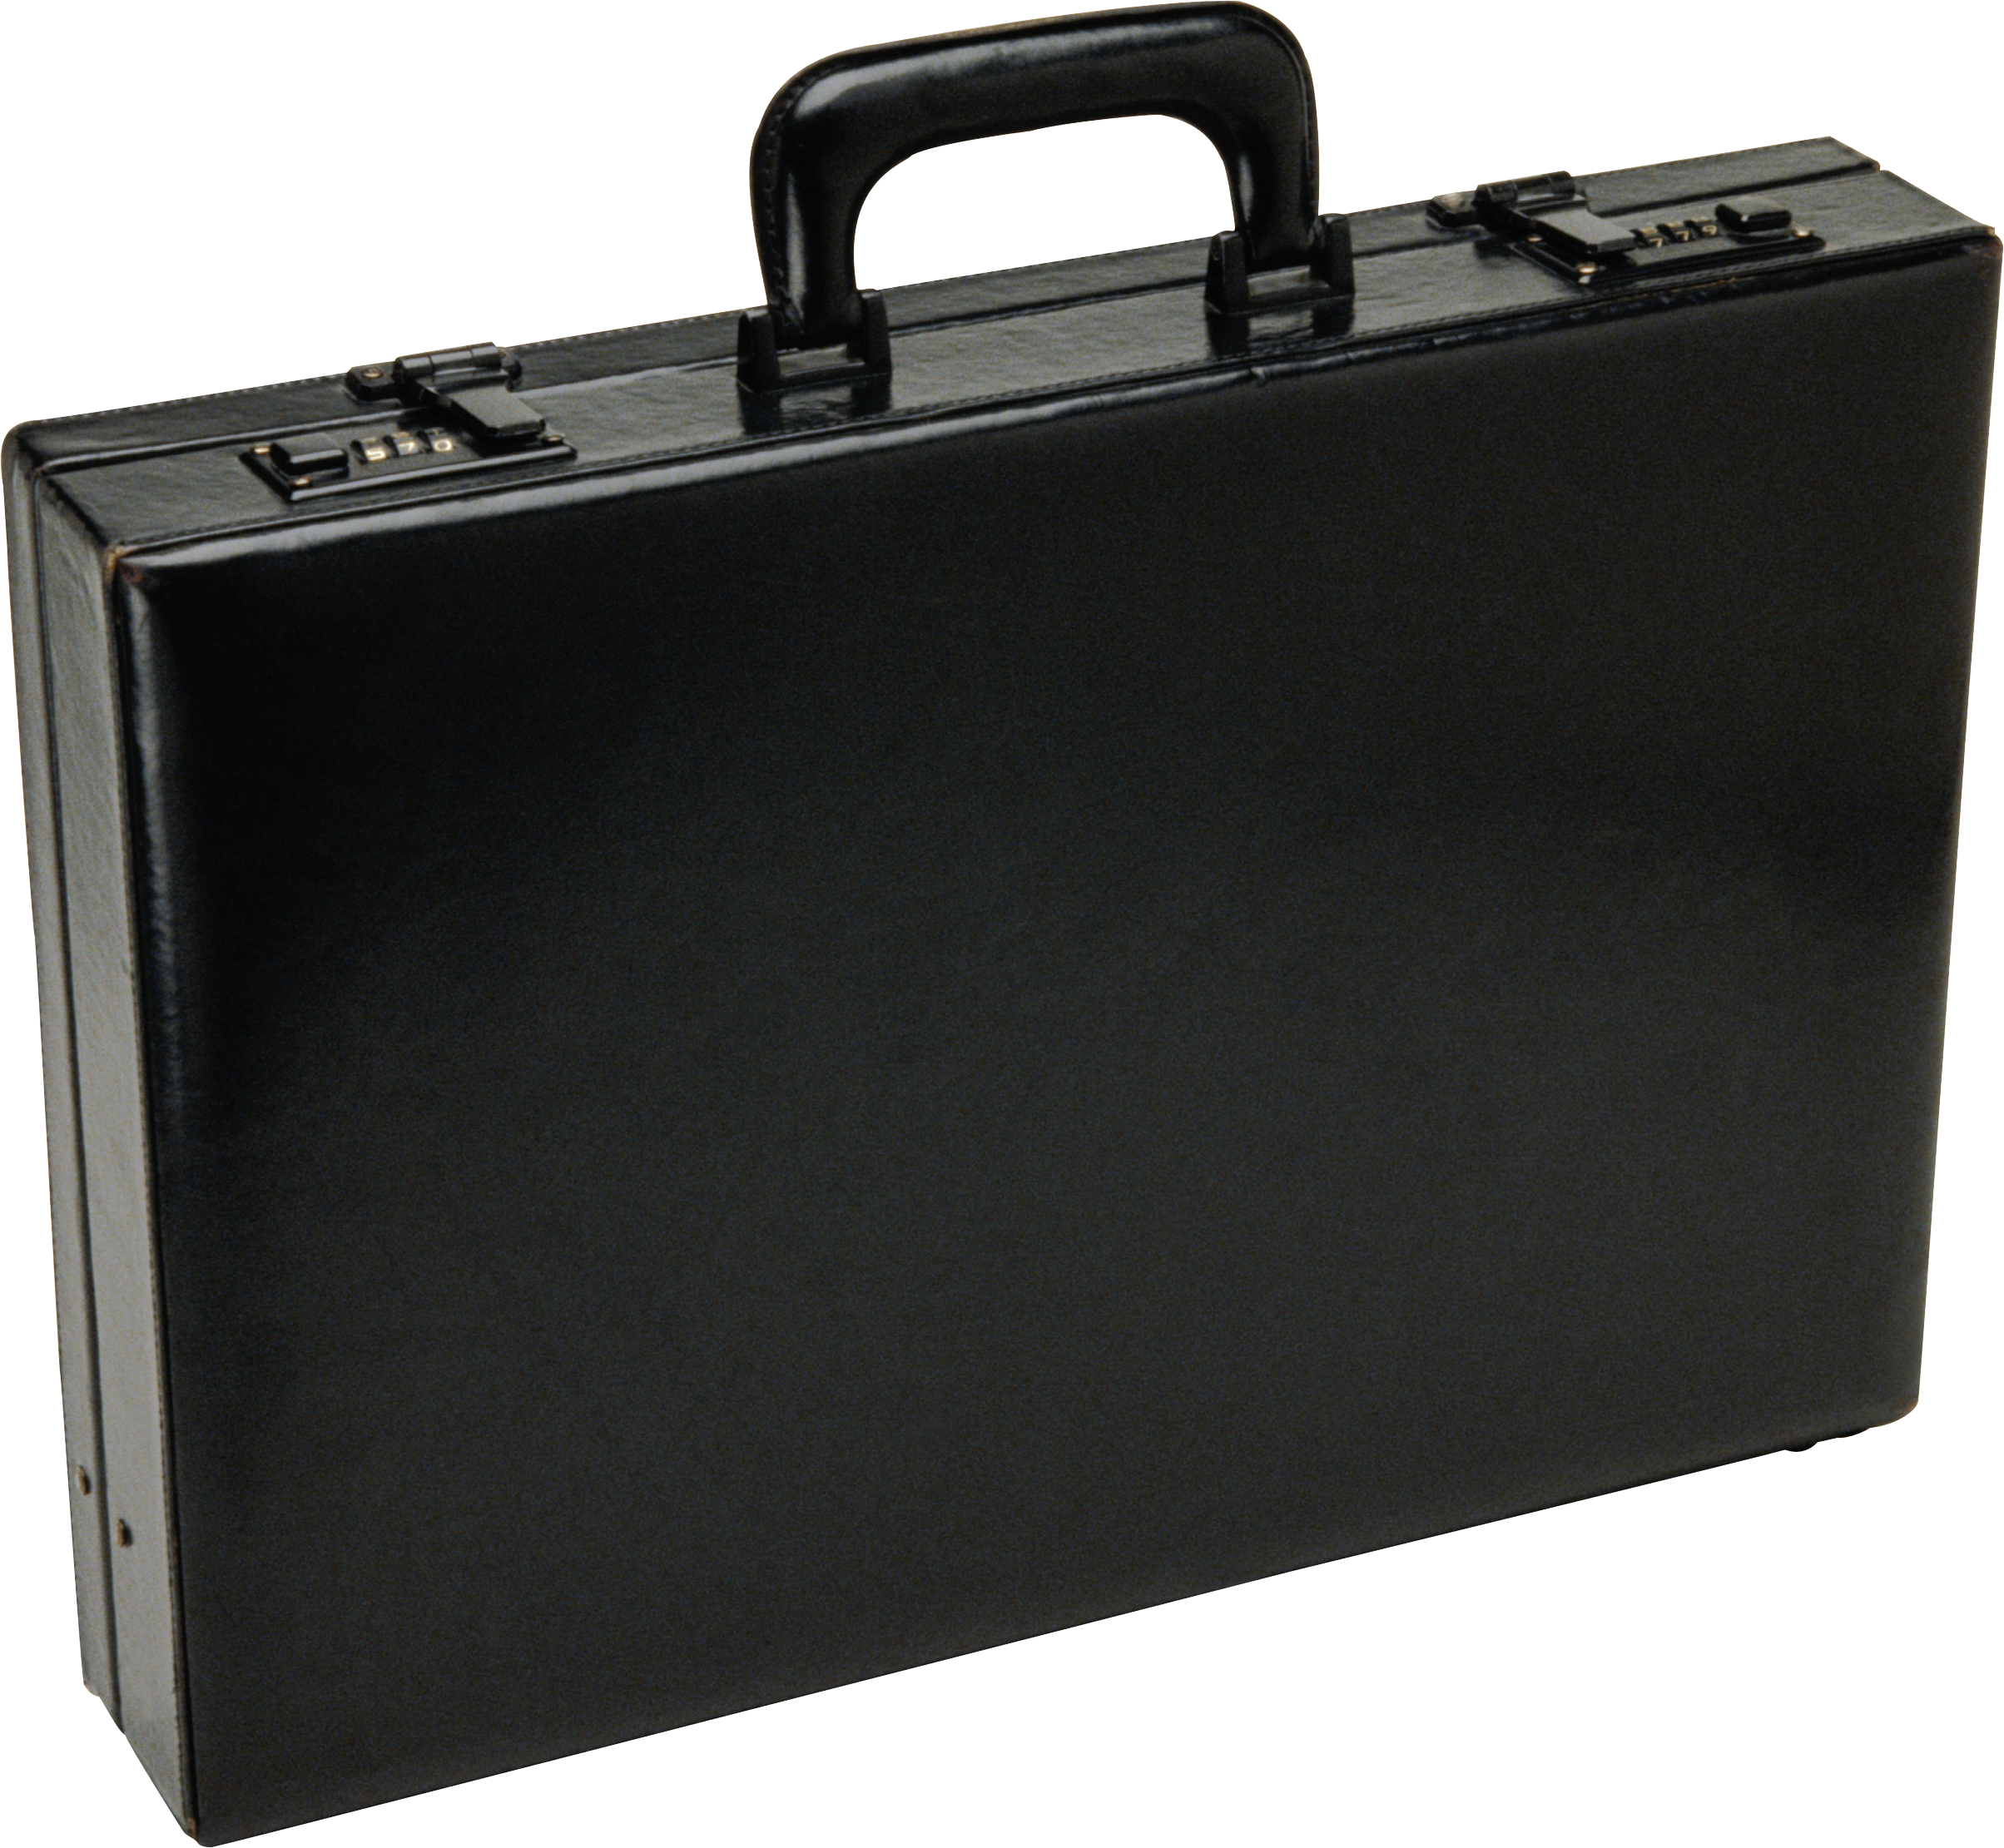 Briefcase Hd Png Hdpng.com 2408 - Briefcase, Transparent background PNG HD thumbnail